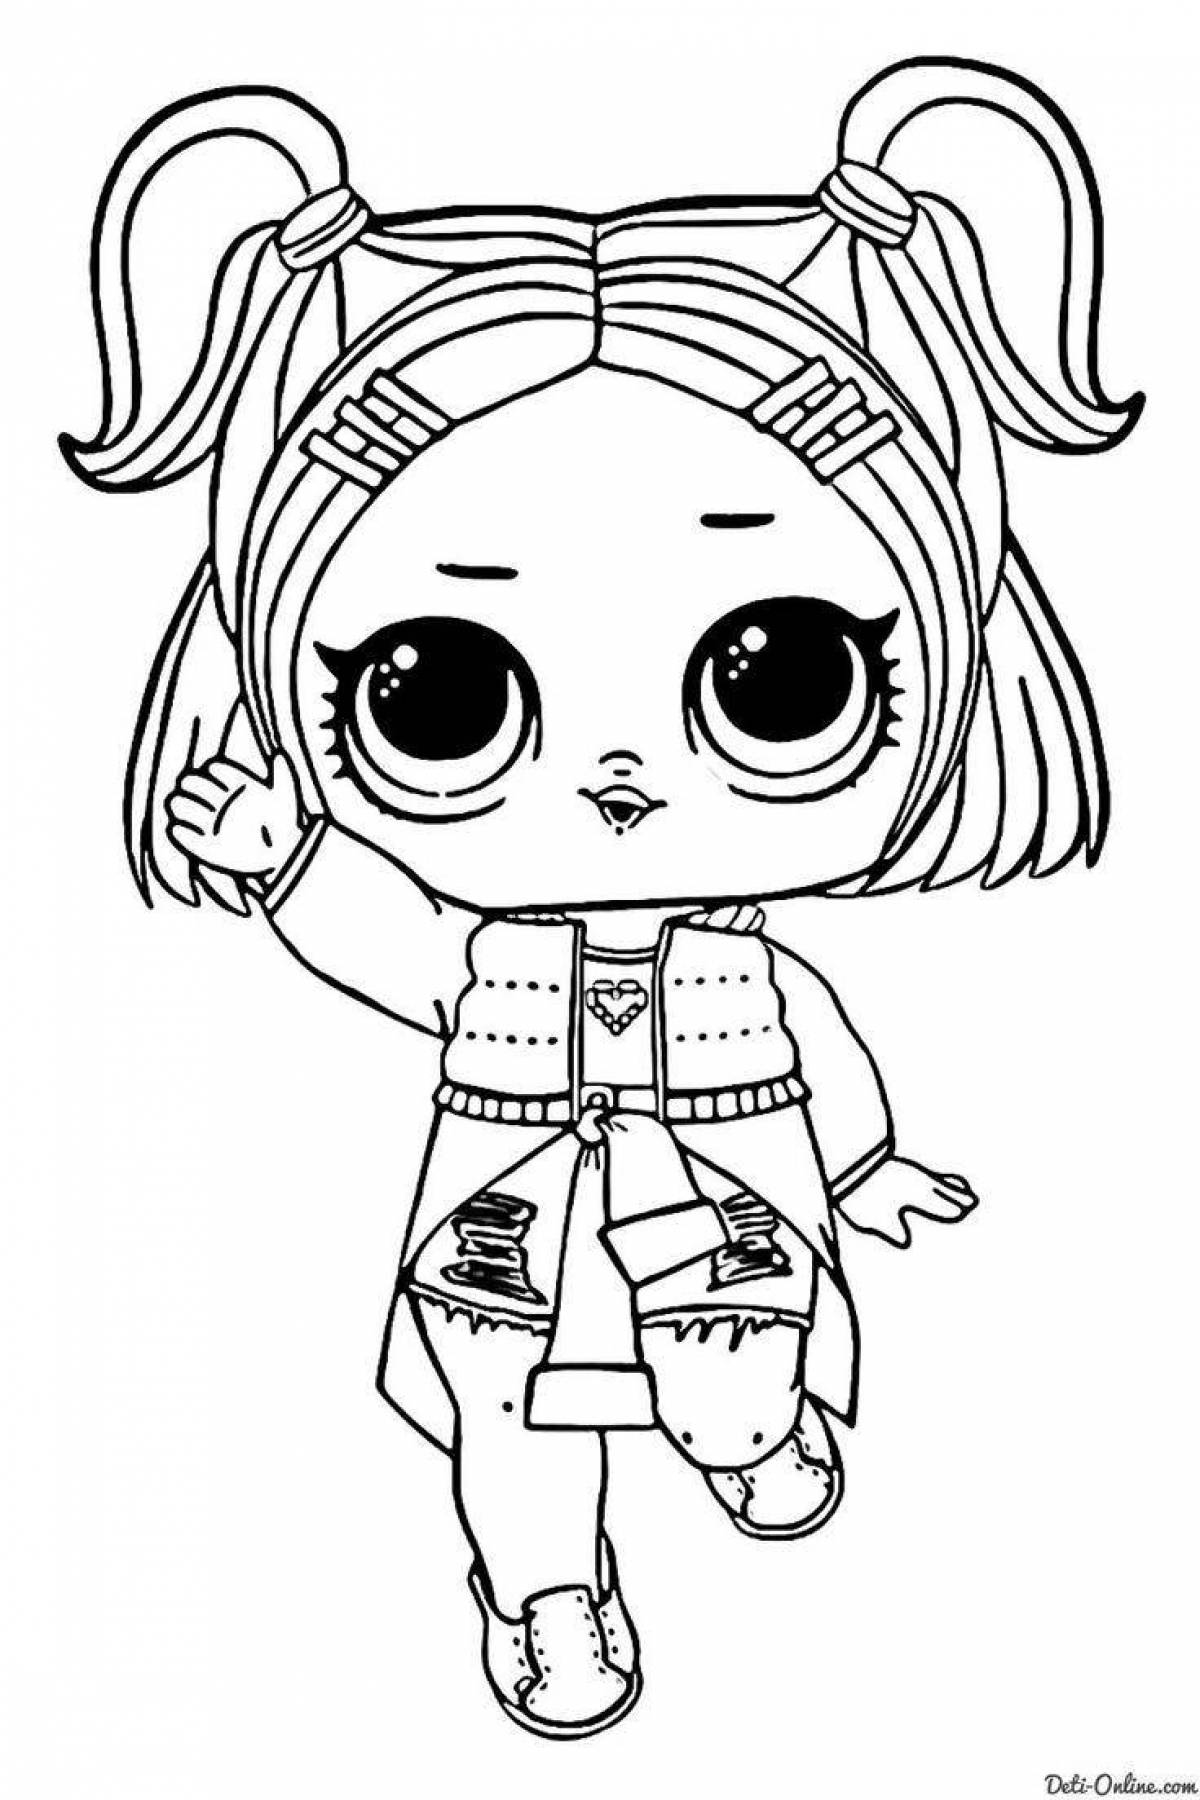 Irresistible coloring book for lol dolls